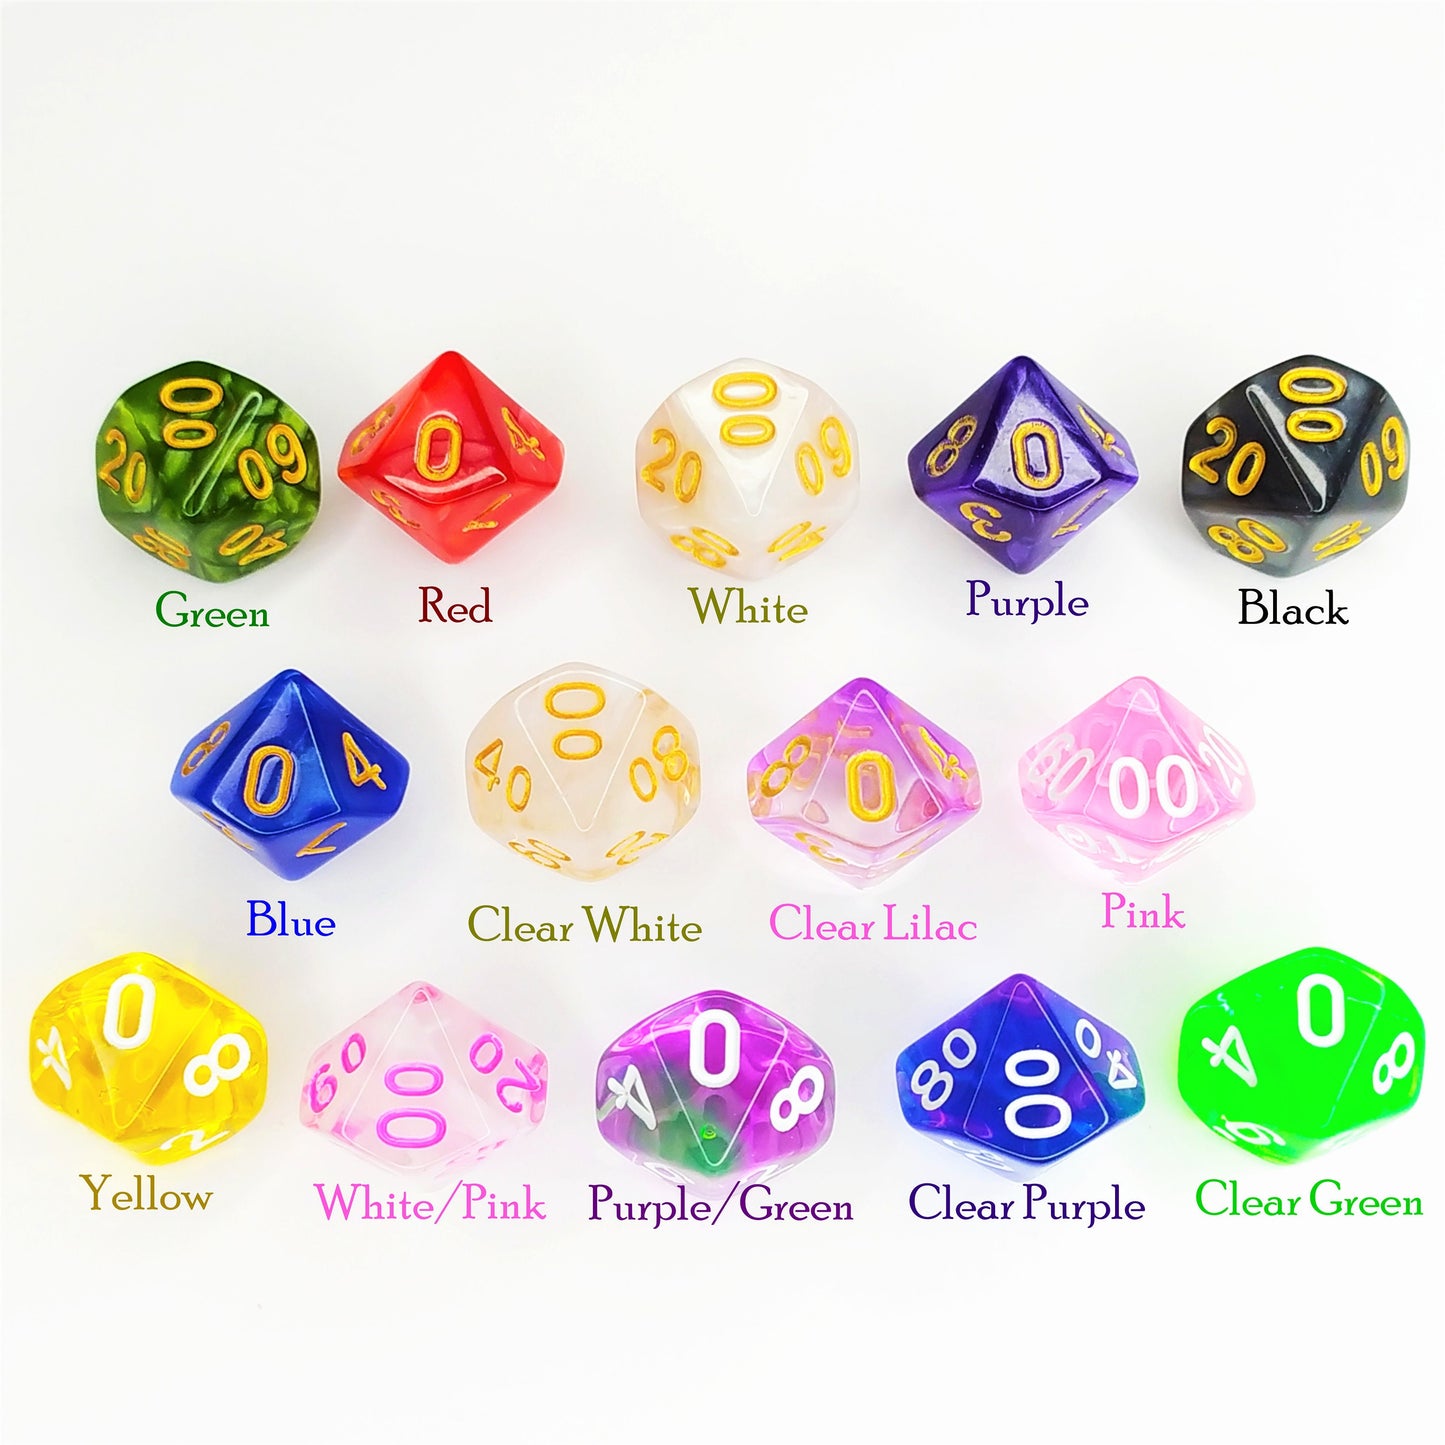 D10/% Dice Earrings, Gold Finishing, Dnd Swag